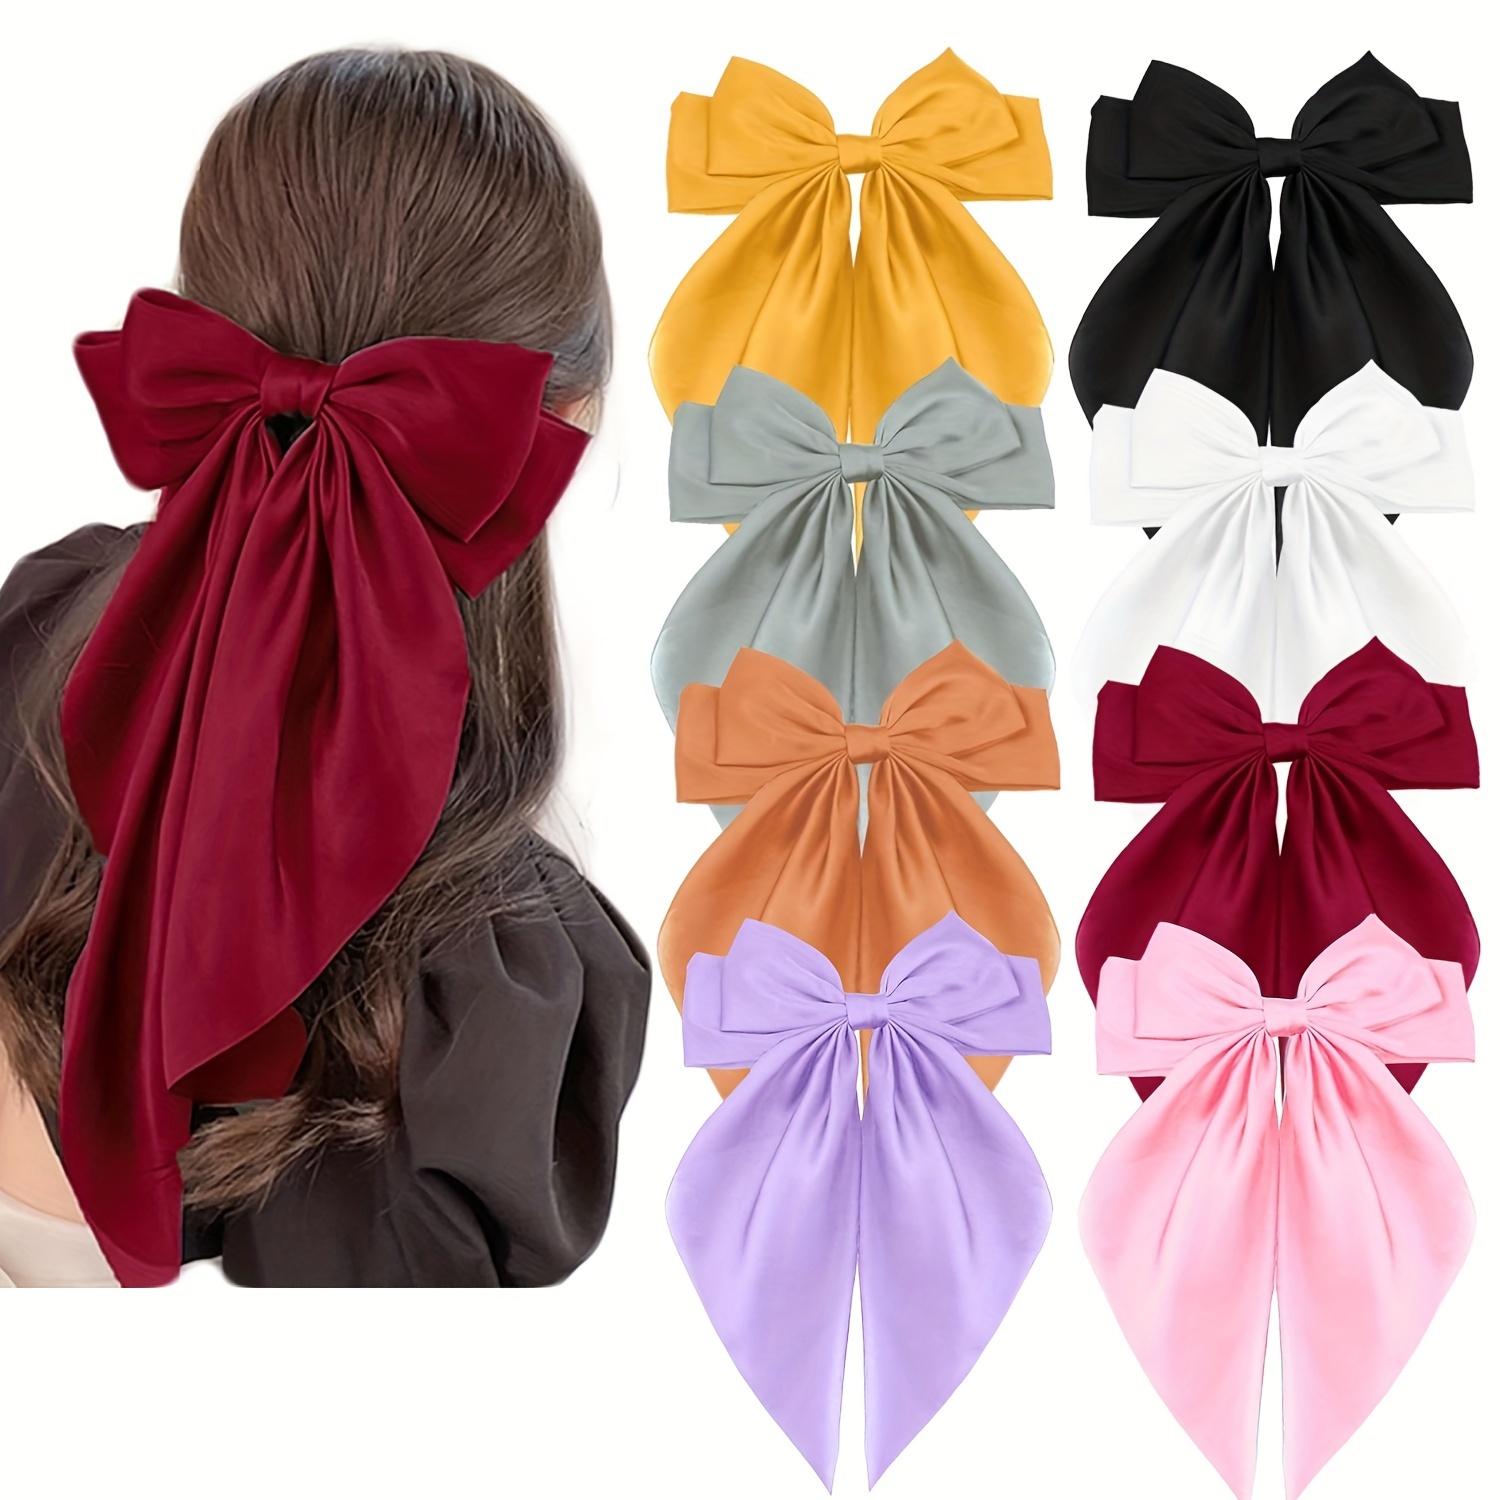 

8pcs Big Bow Hair Clip Ribbon Solid Color Versatile Spring Clip Style Tie High Horsetail Hair Clip Head Accessories